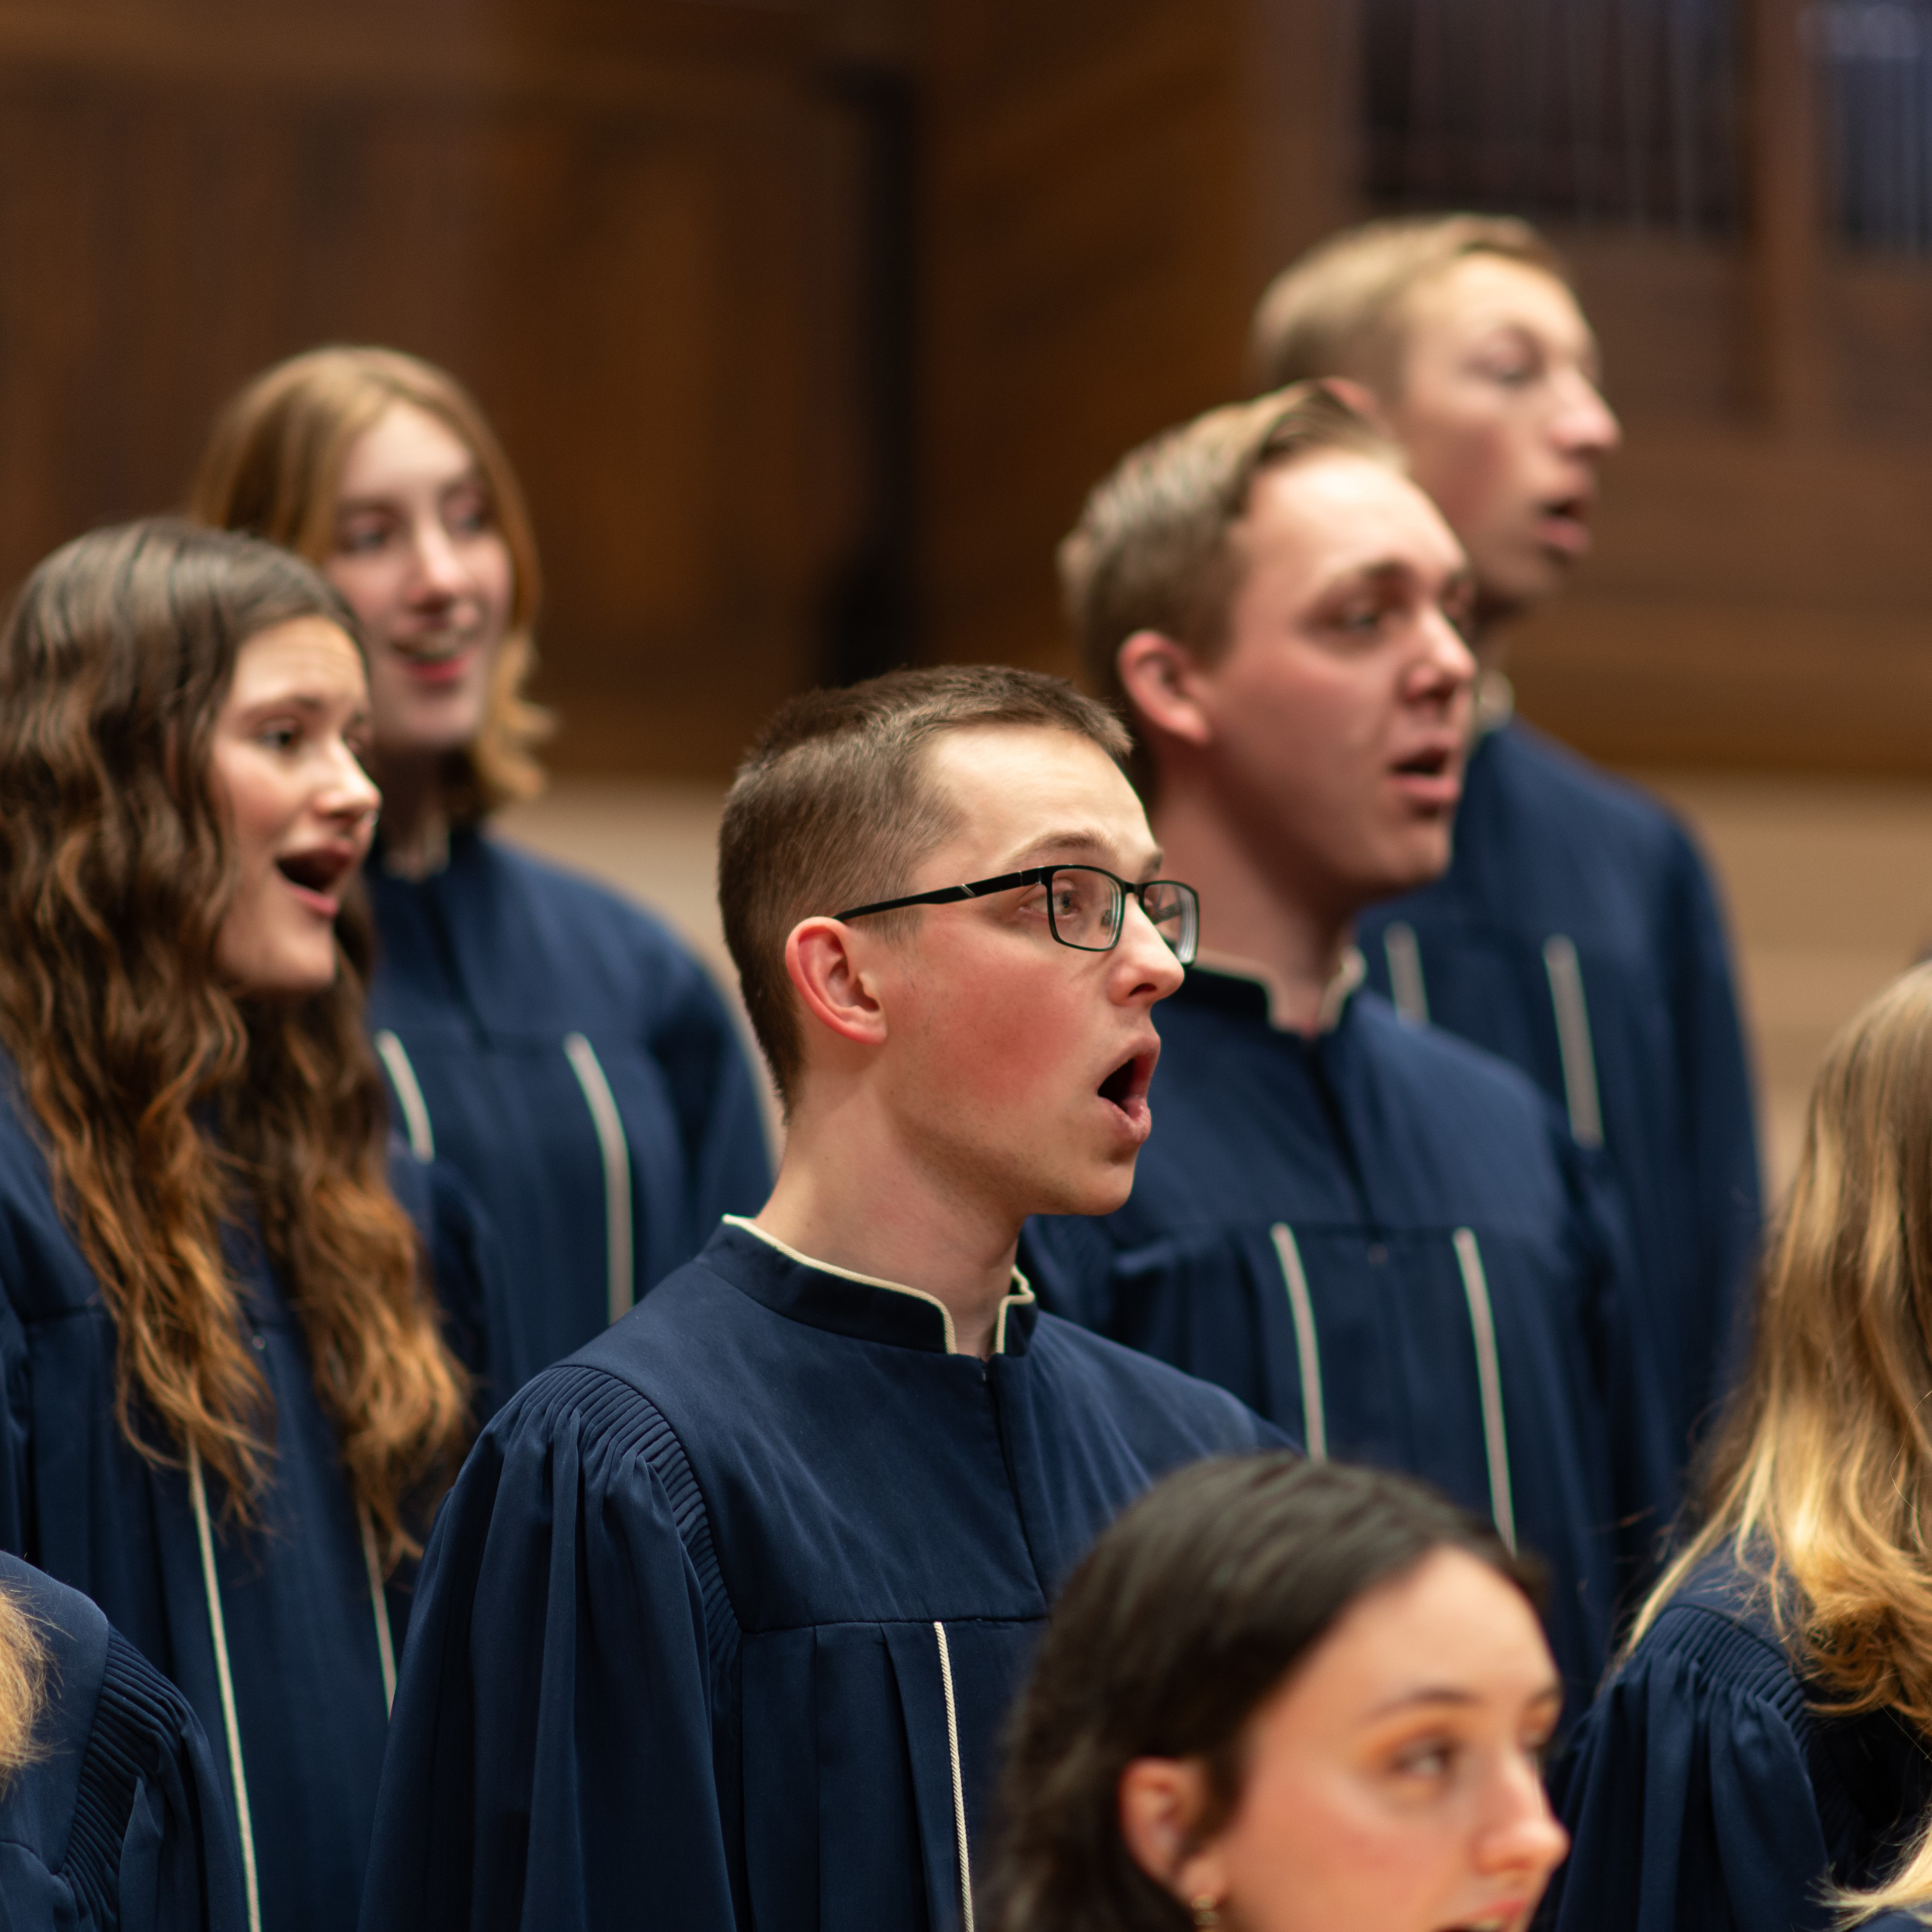 Male student singing in a choir